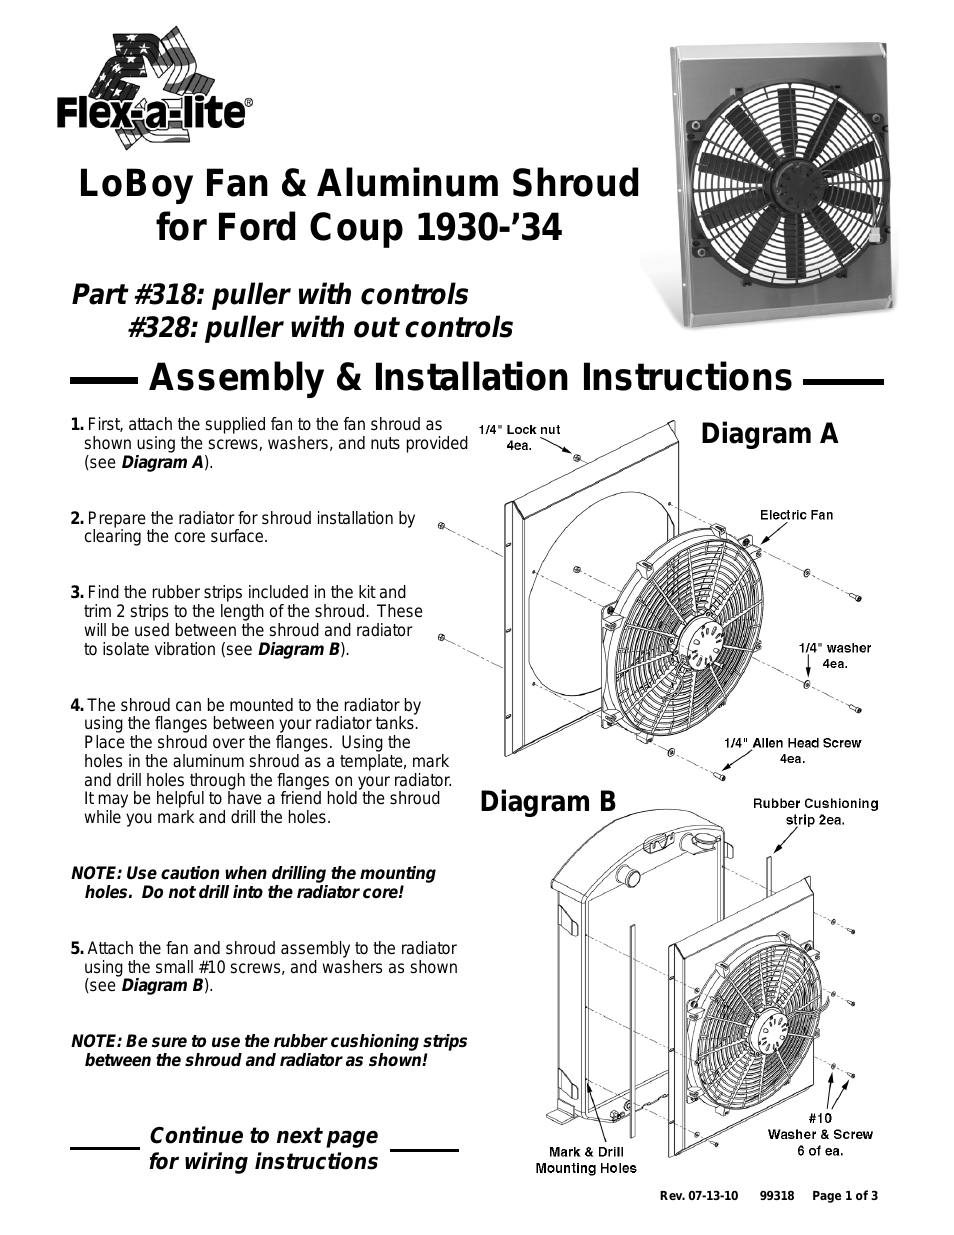 318: puller with controls LoBoy Fan & Aluminum Shroud for Ford Coup 1930-34